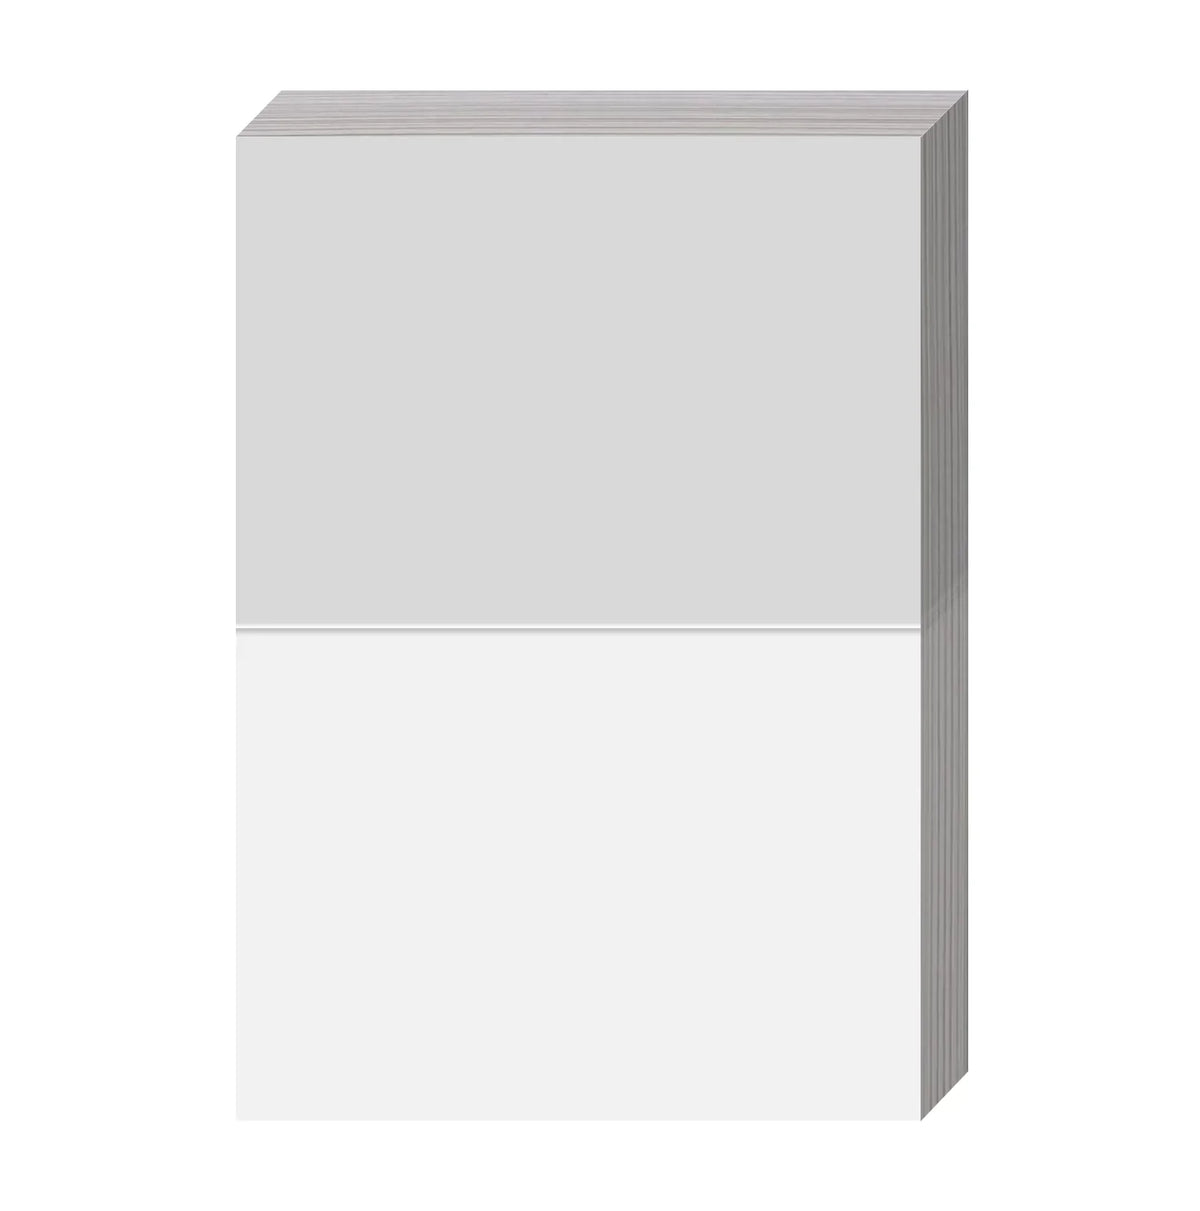 A7 Half-Fold White Greeting Cards | Heavyweight 80lb Cover | 5" x 7" | 50 Per Pack FoldCard